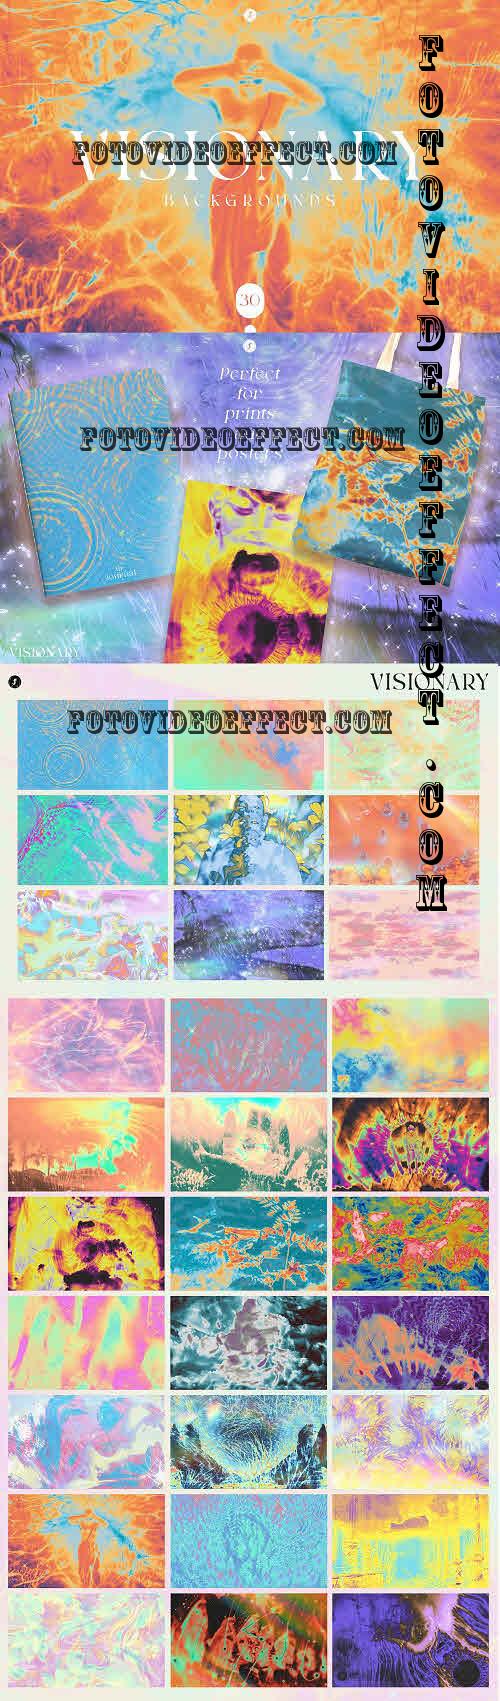 Visionary - Psychedelic Backgrounds - 7412508